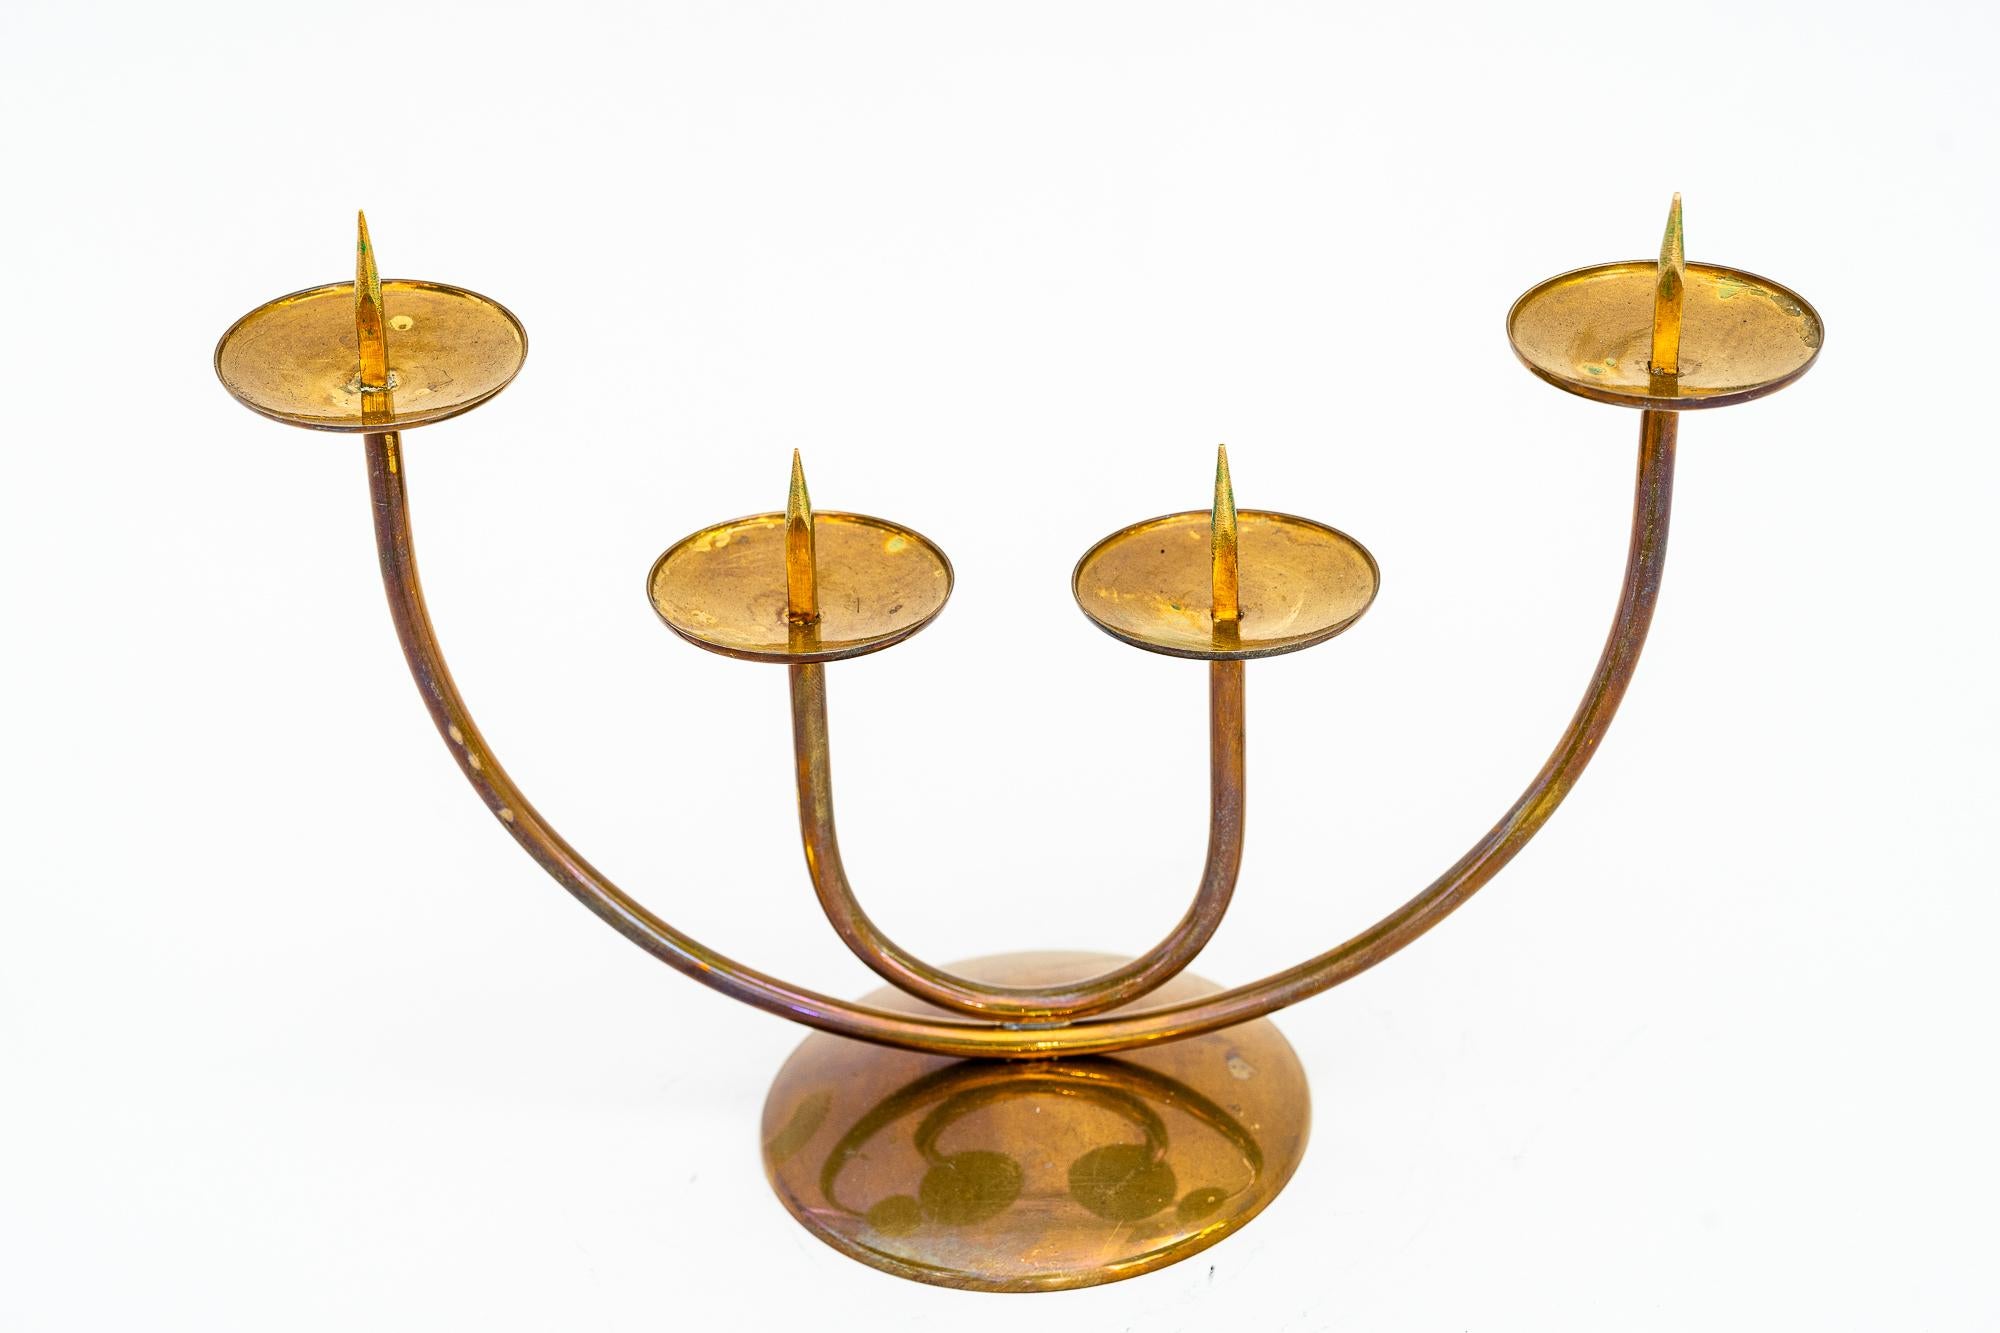 Candle holder for 4 candles Vienna around 1950s
Original condition.